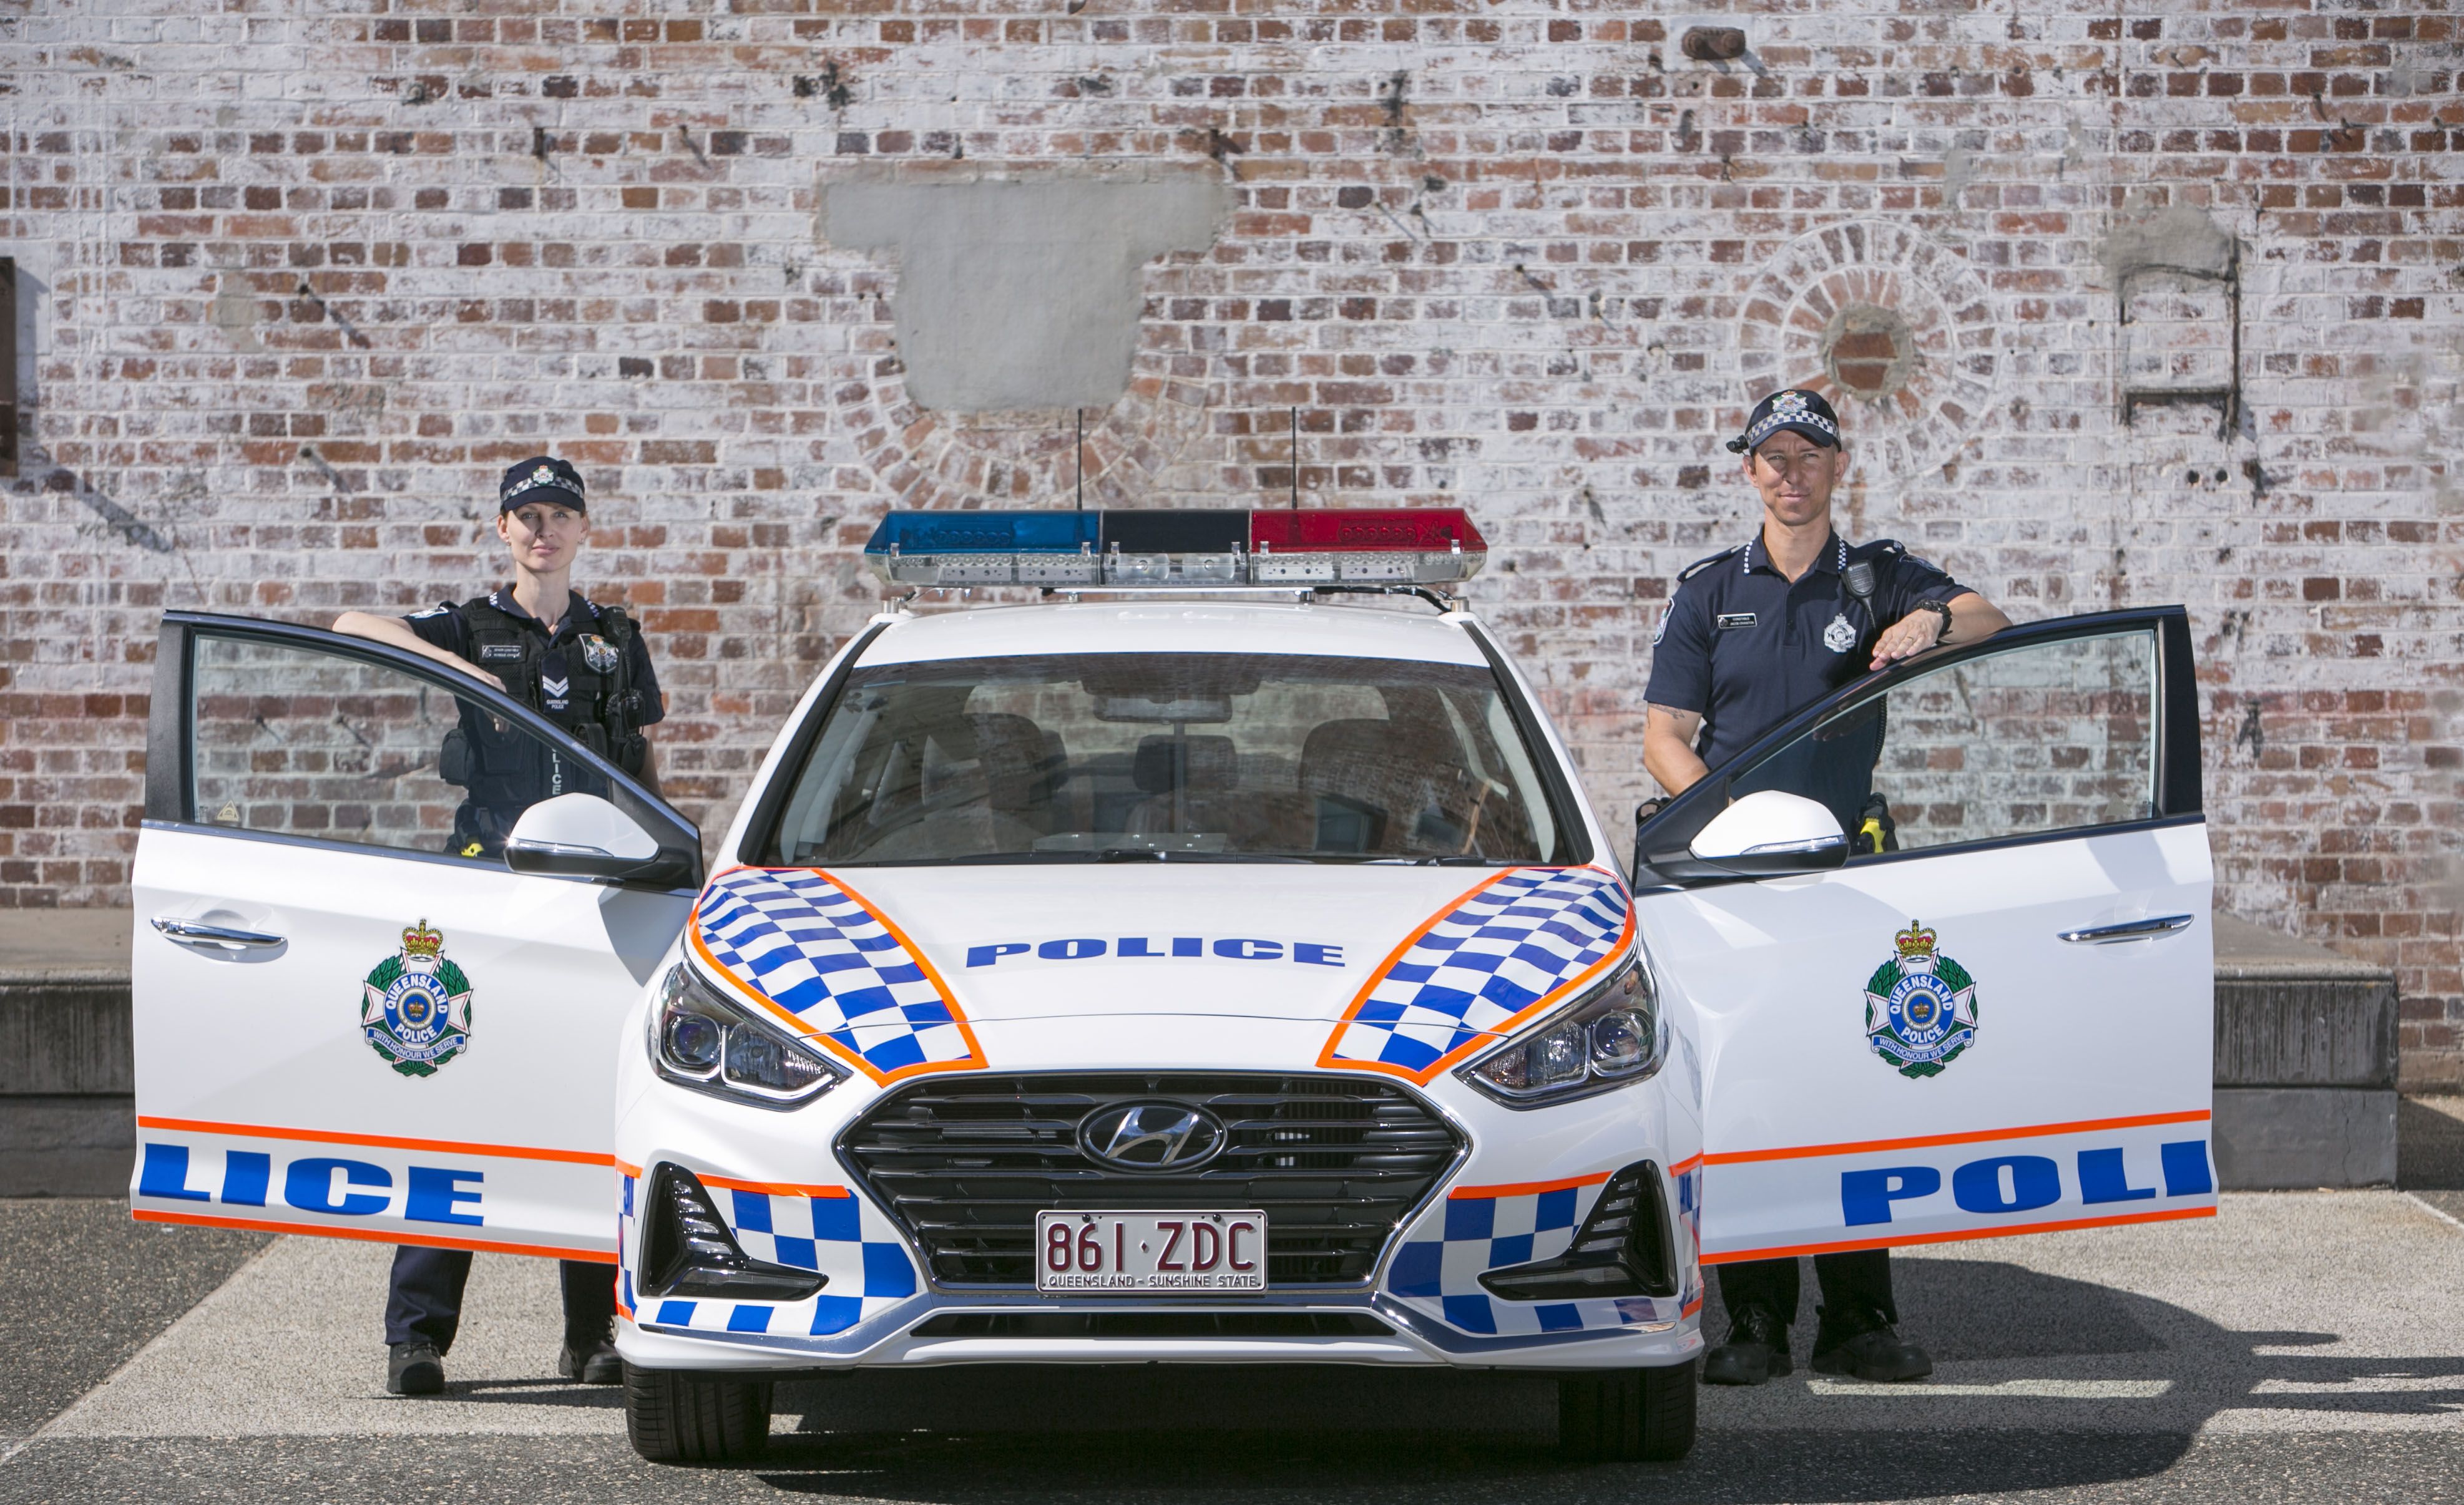 Officers next to a police car